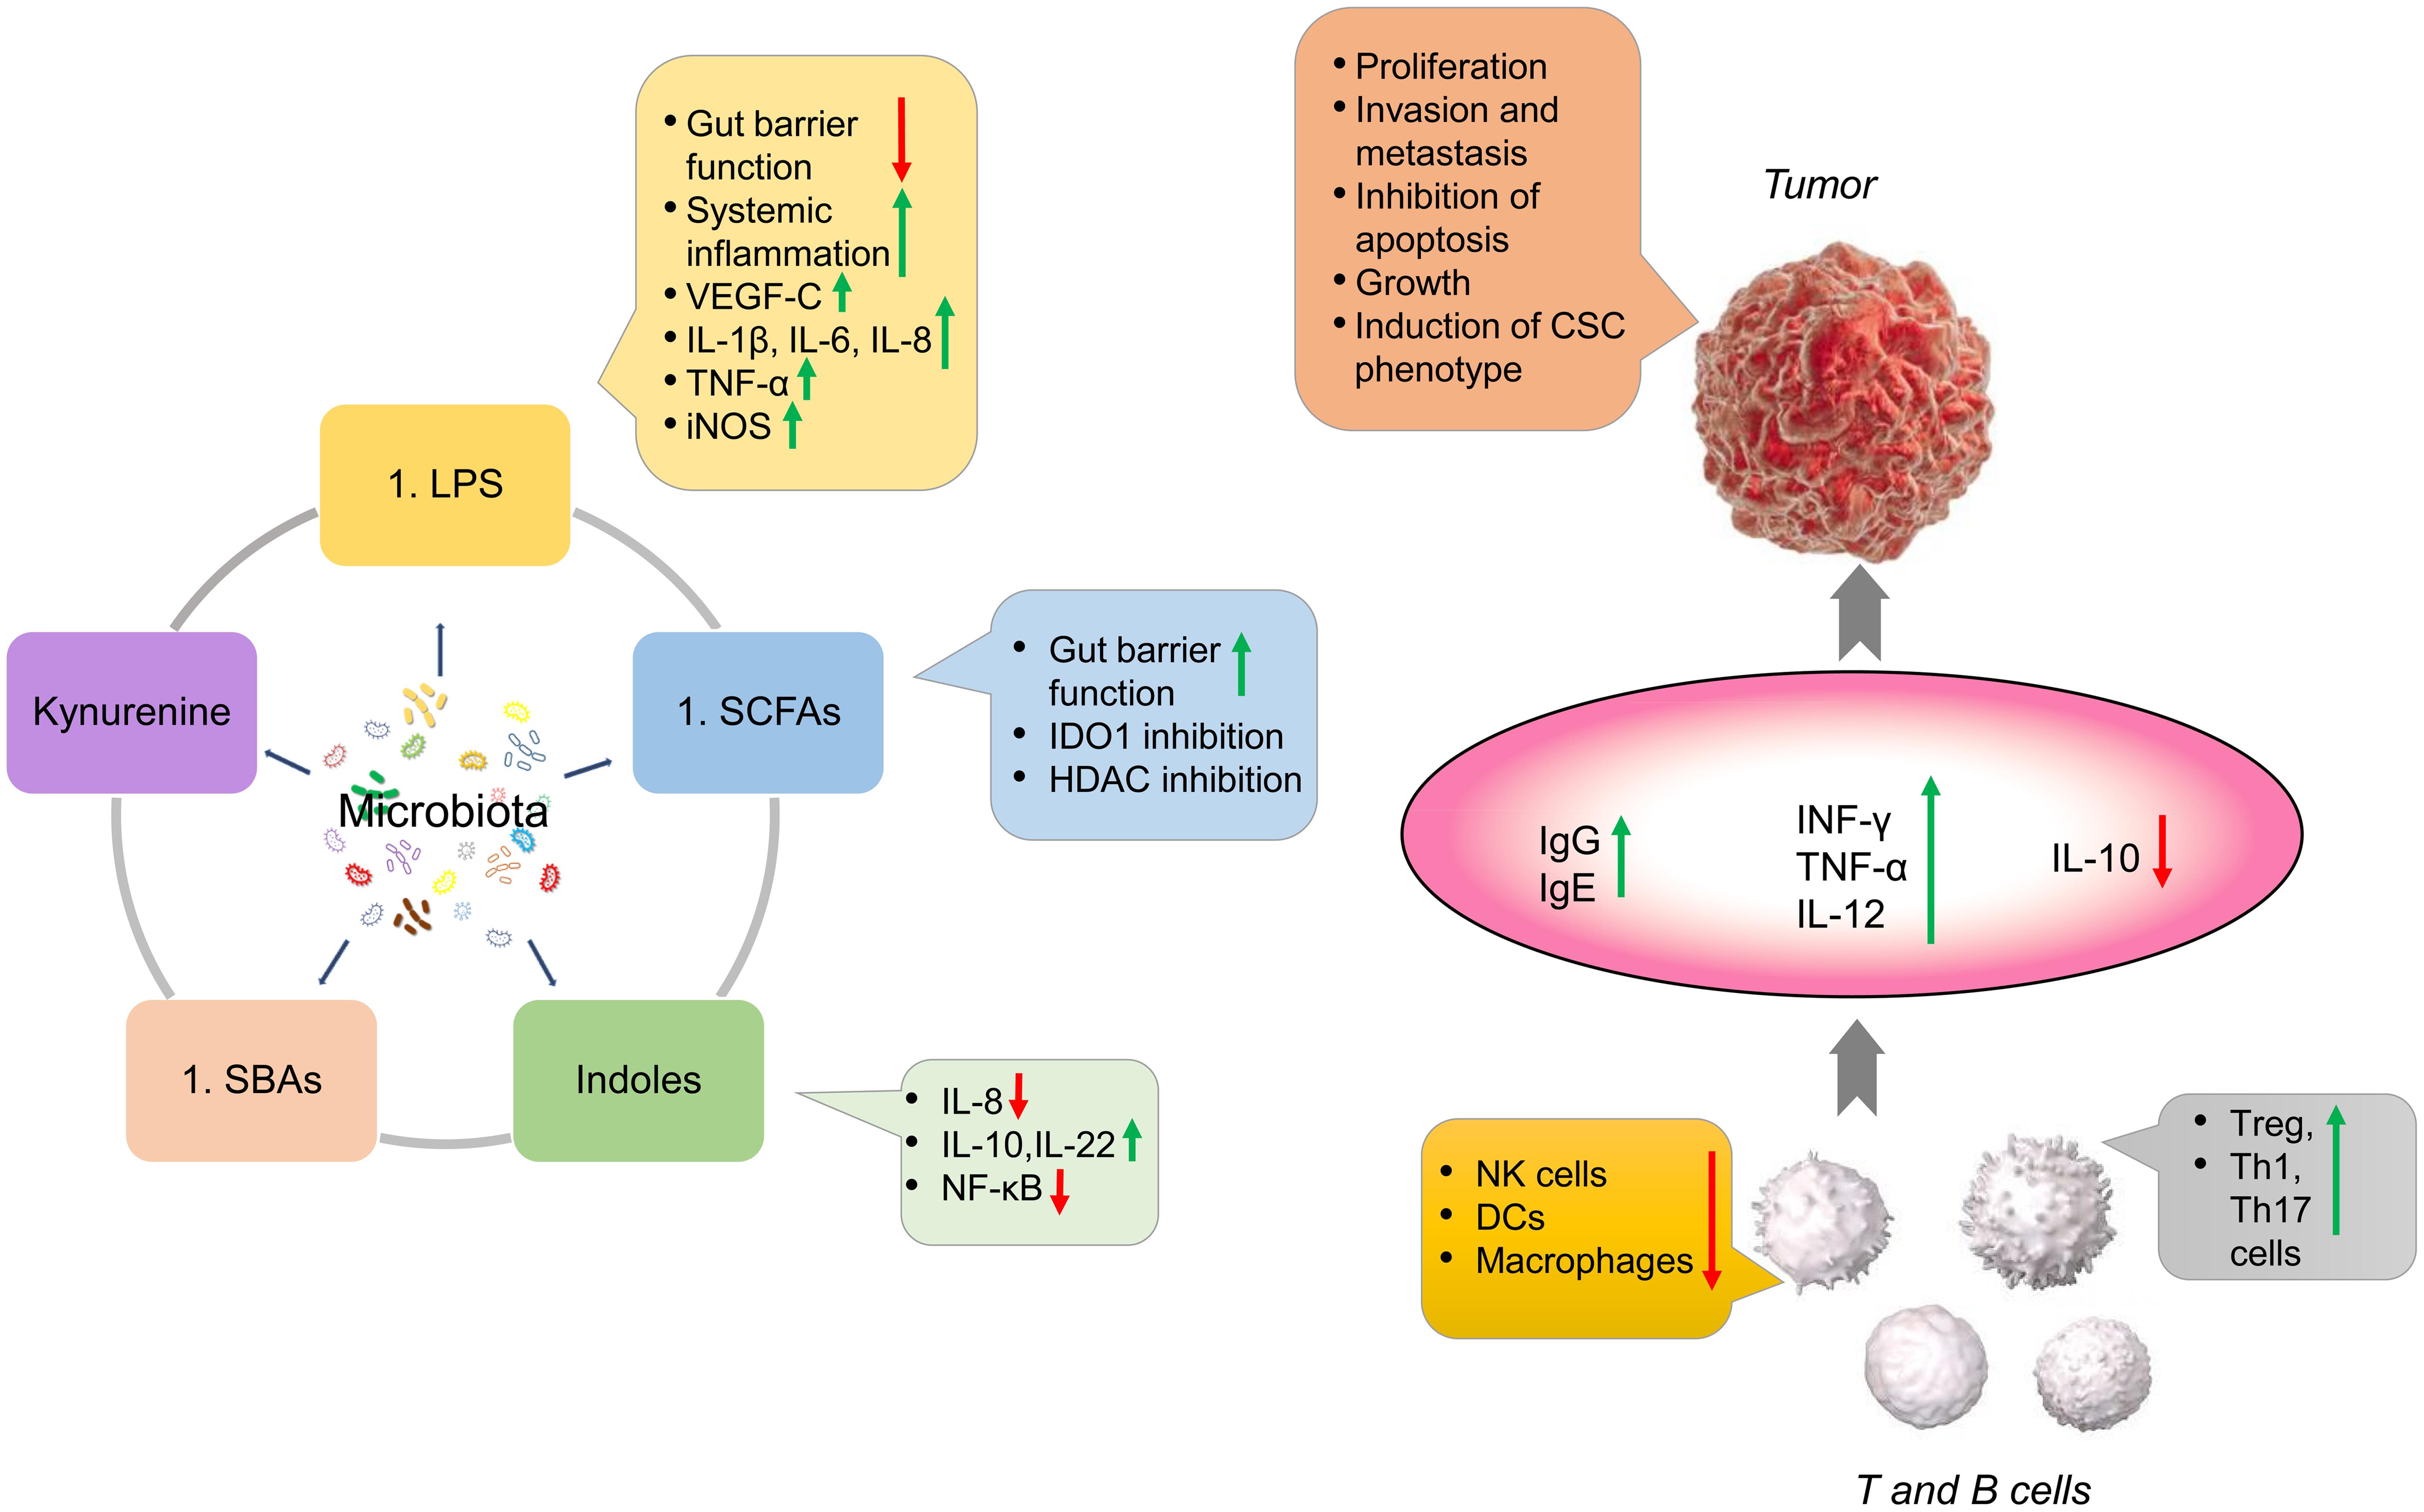 Relationships of various metabolites of the gut microbiota with tumor development.